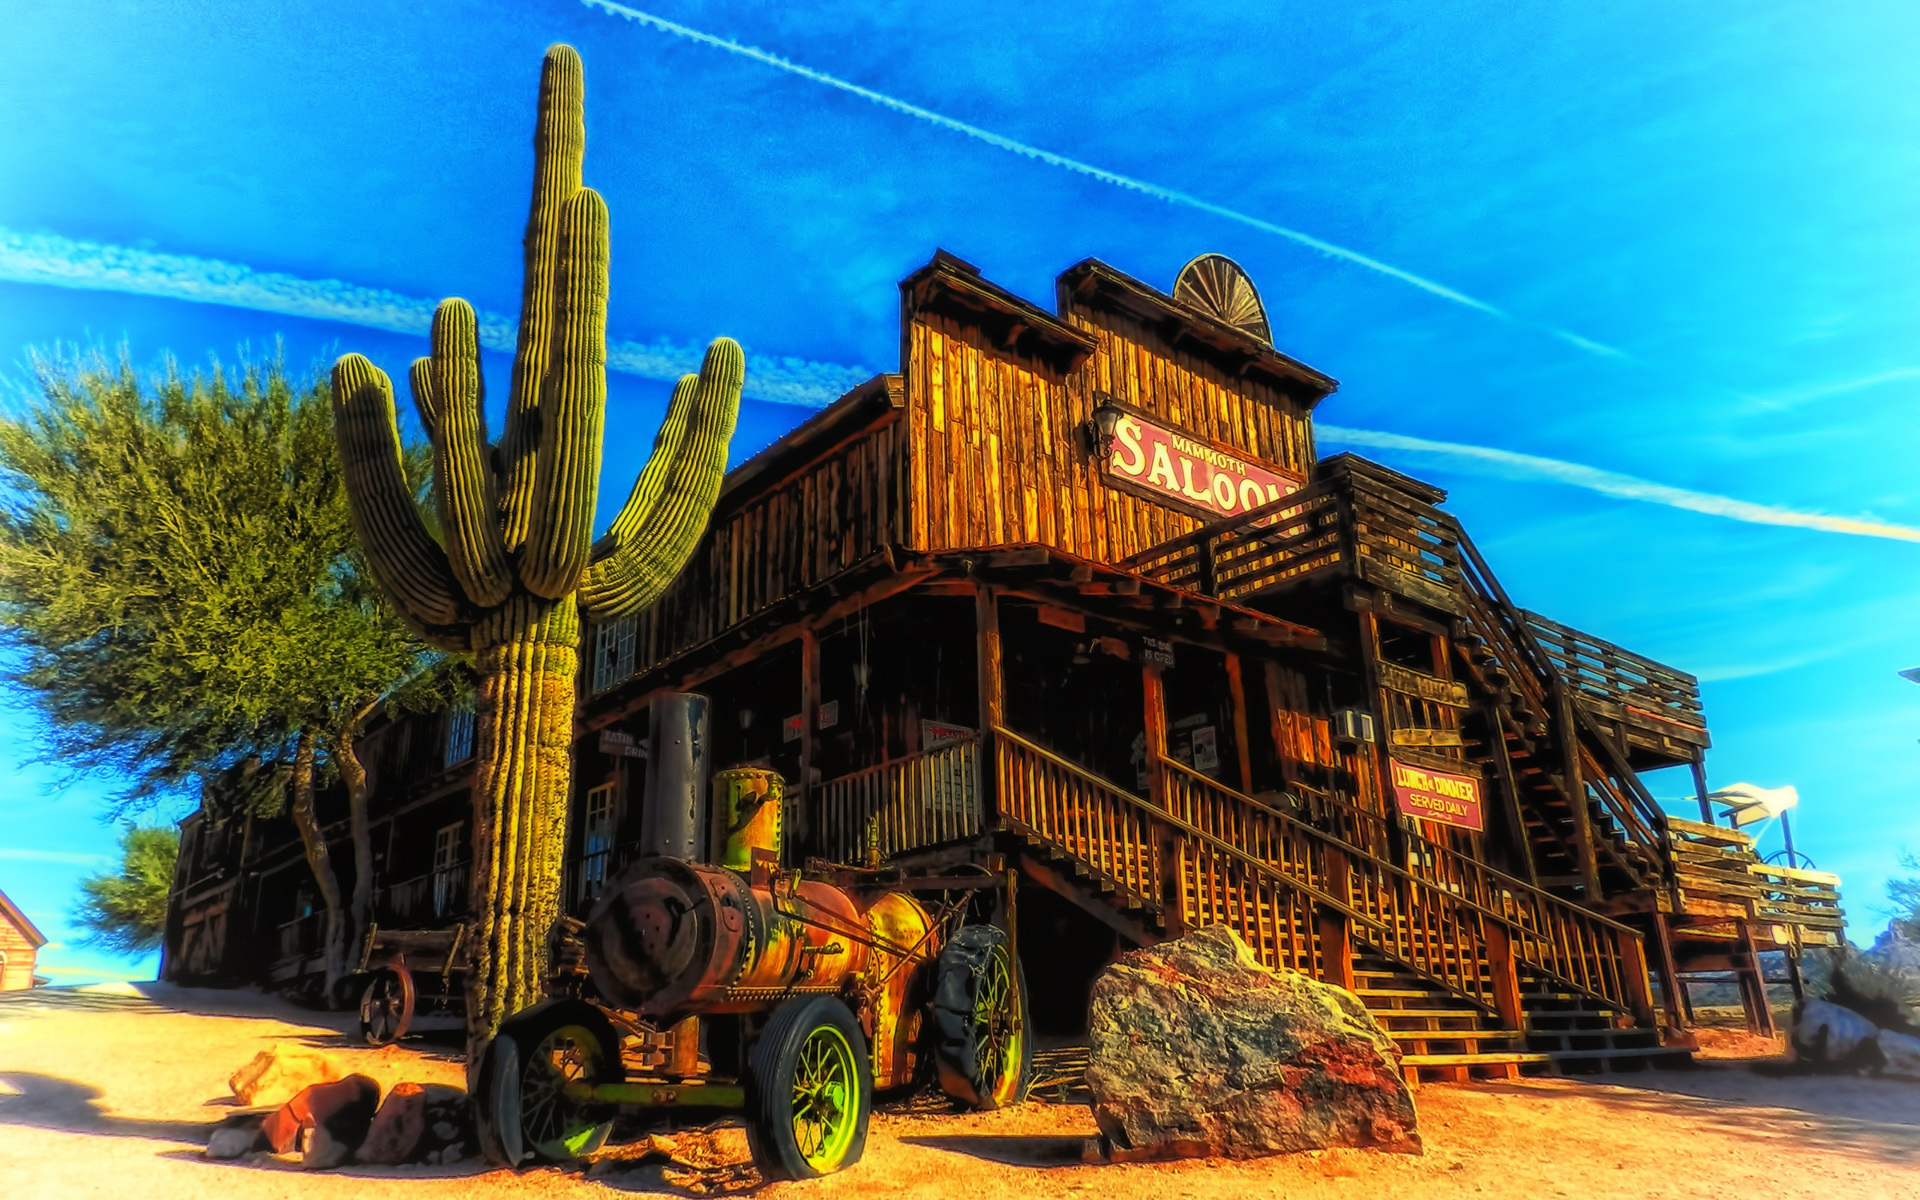 Wallpaper Cactus Bar Saloon Wild West In The